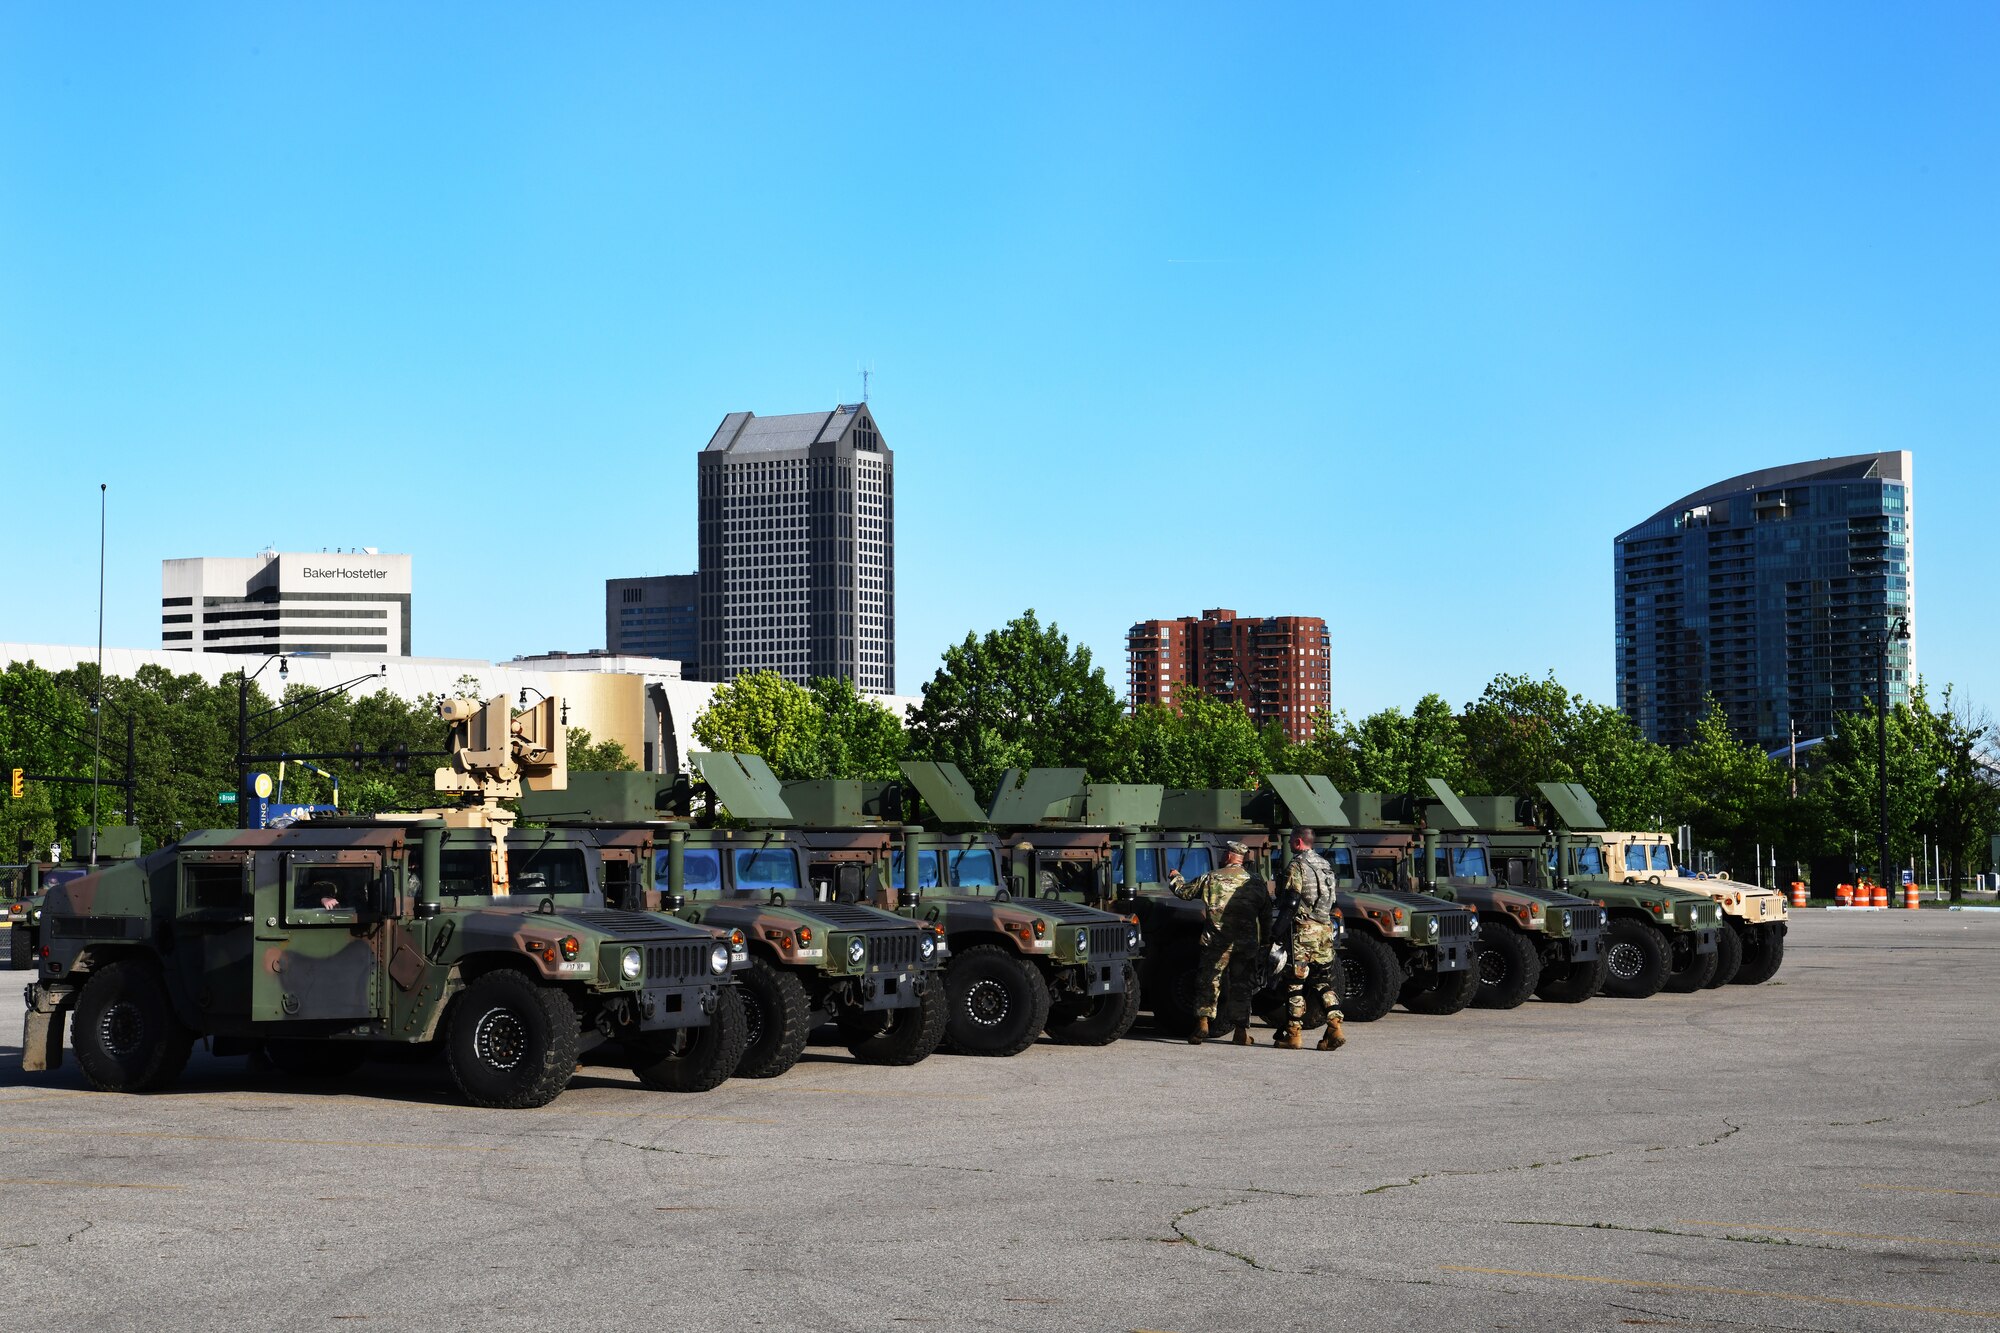 Ohio National Guard Humvees are staged in a parking lot in downtown Columbus, Ohio during ongoing protests, May 31, 2020. Gov. Mike DeWine activated the Guard to assist local law enforcement in Columbus and Cleveland with providing safety and protection to the community, while ensuring people’s right to gather and demonstrate peacefully.